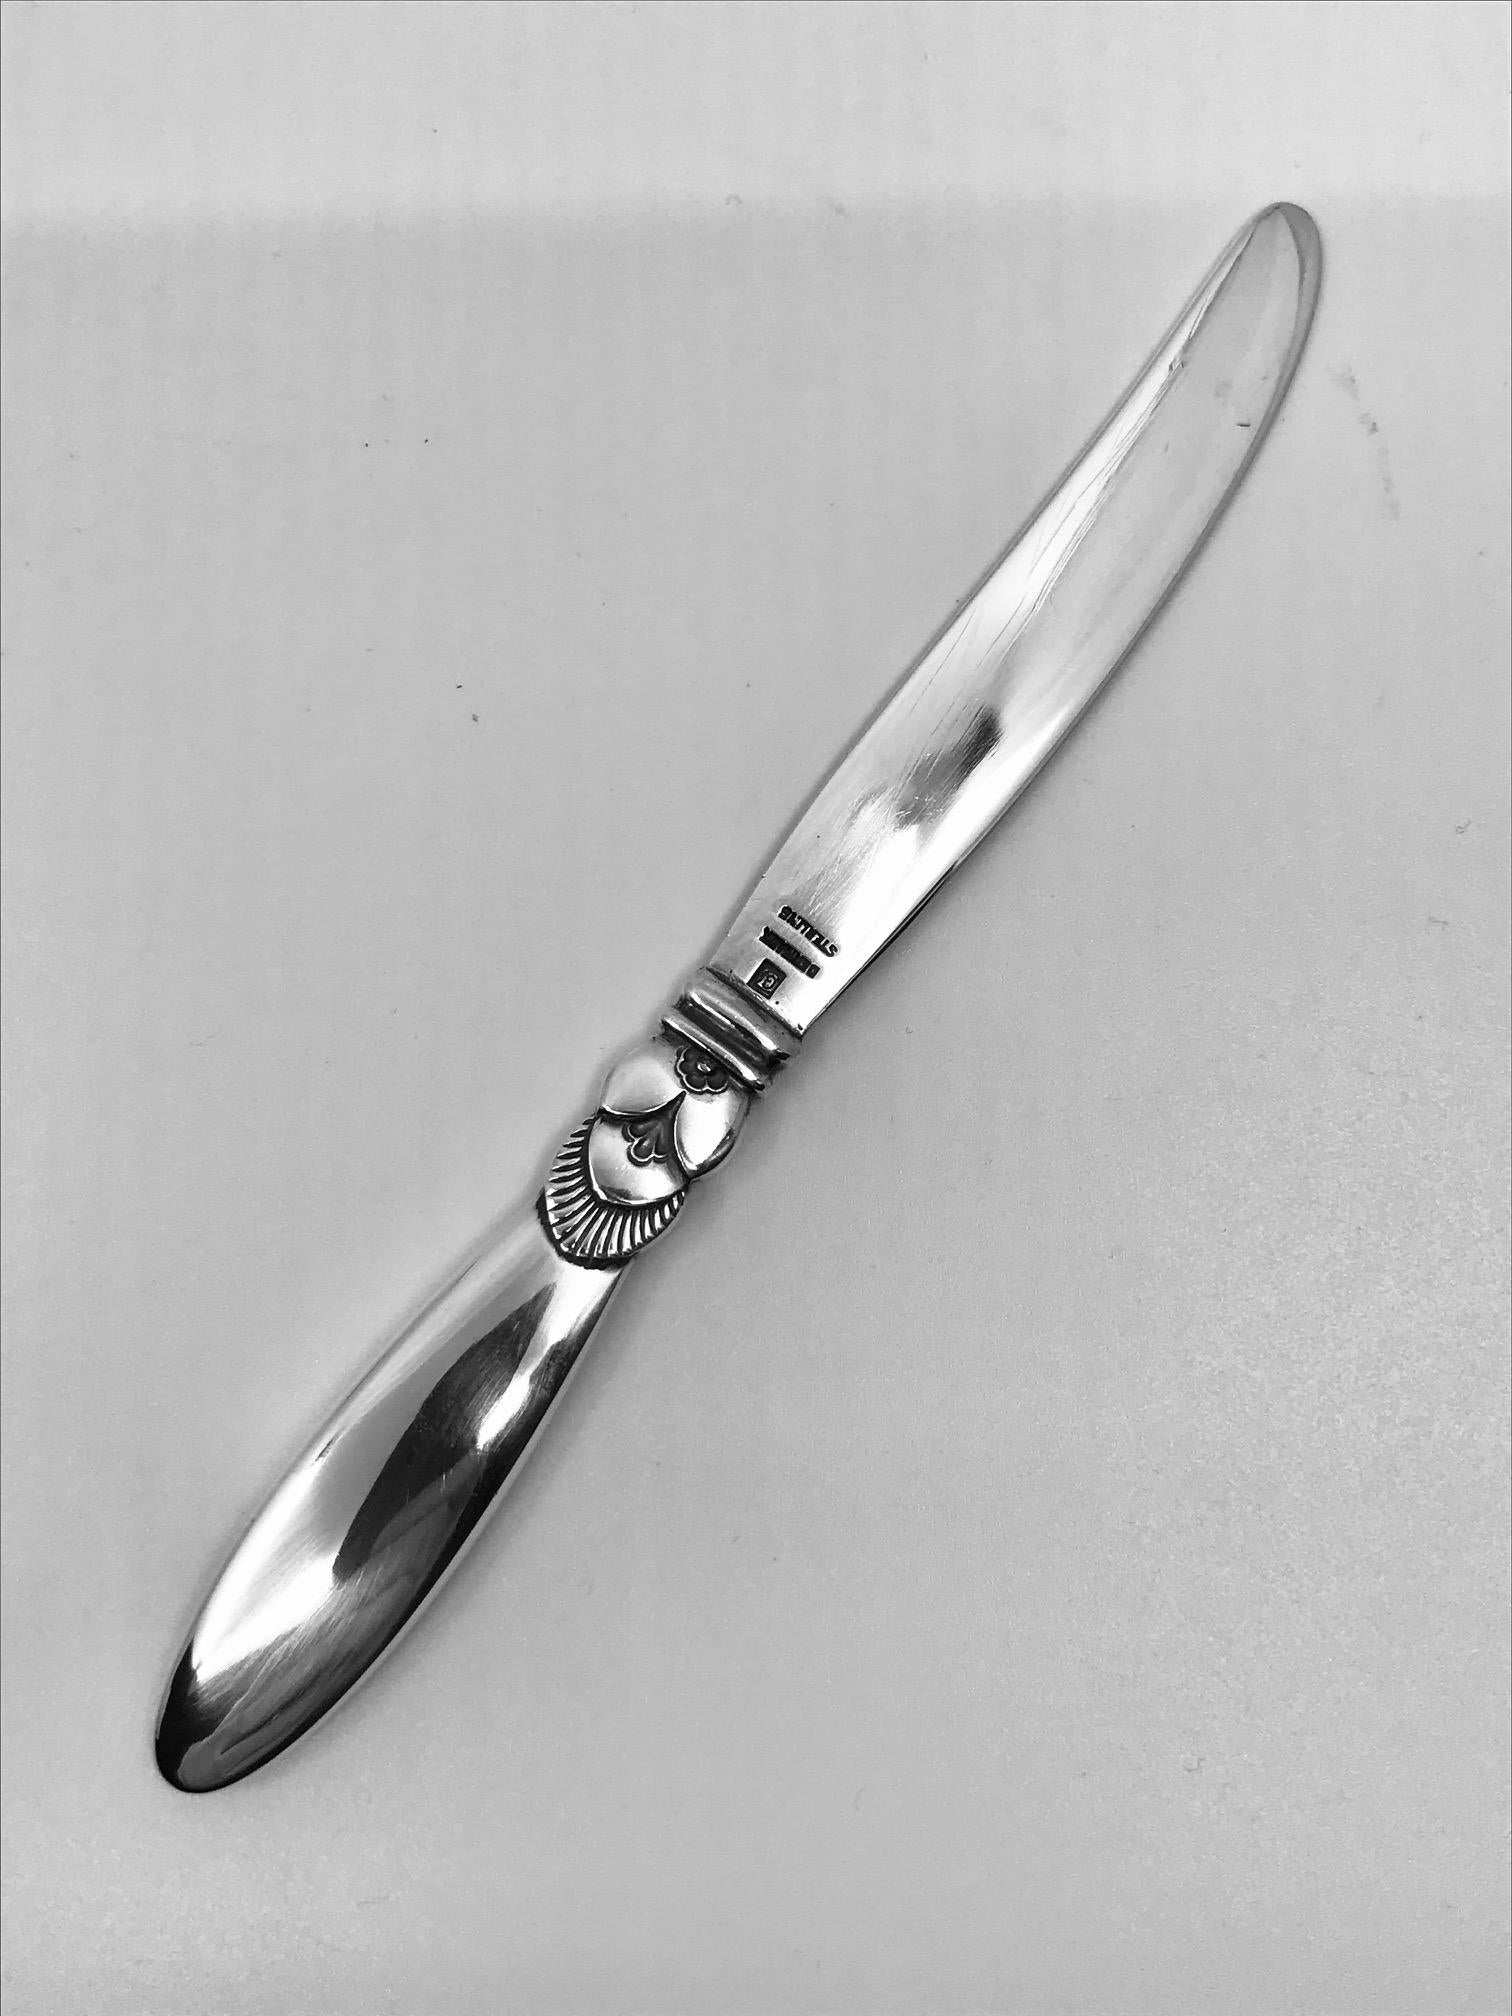 Sterling silver Georg Jensen child’s knife with silver blade, item 045 in the Cactus pattern, design #30 by Gundorph Albertus from 1930.

Additional information:
Material: Sterling silver
Styles: Art Deco
Hallmarks: With Georg Jensen hallmark, made